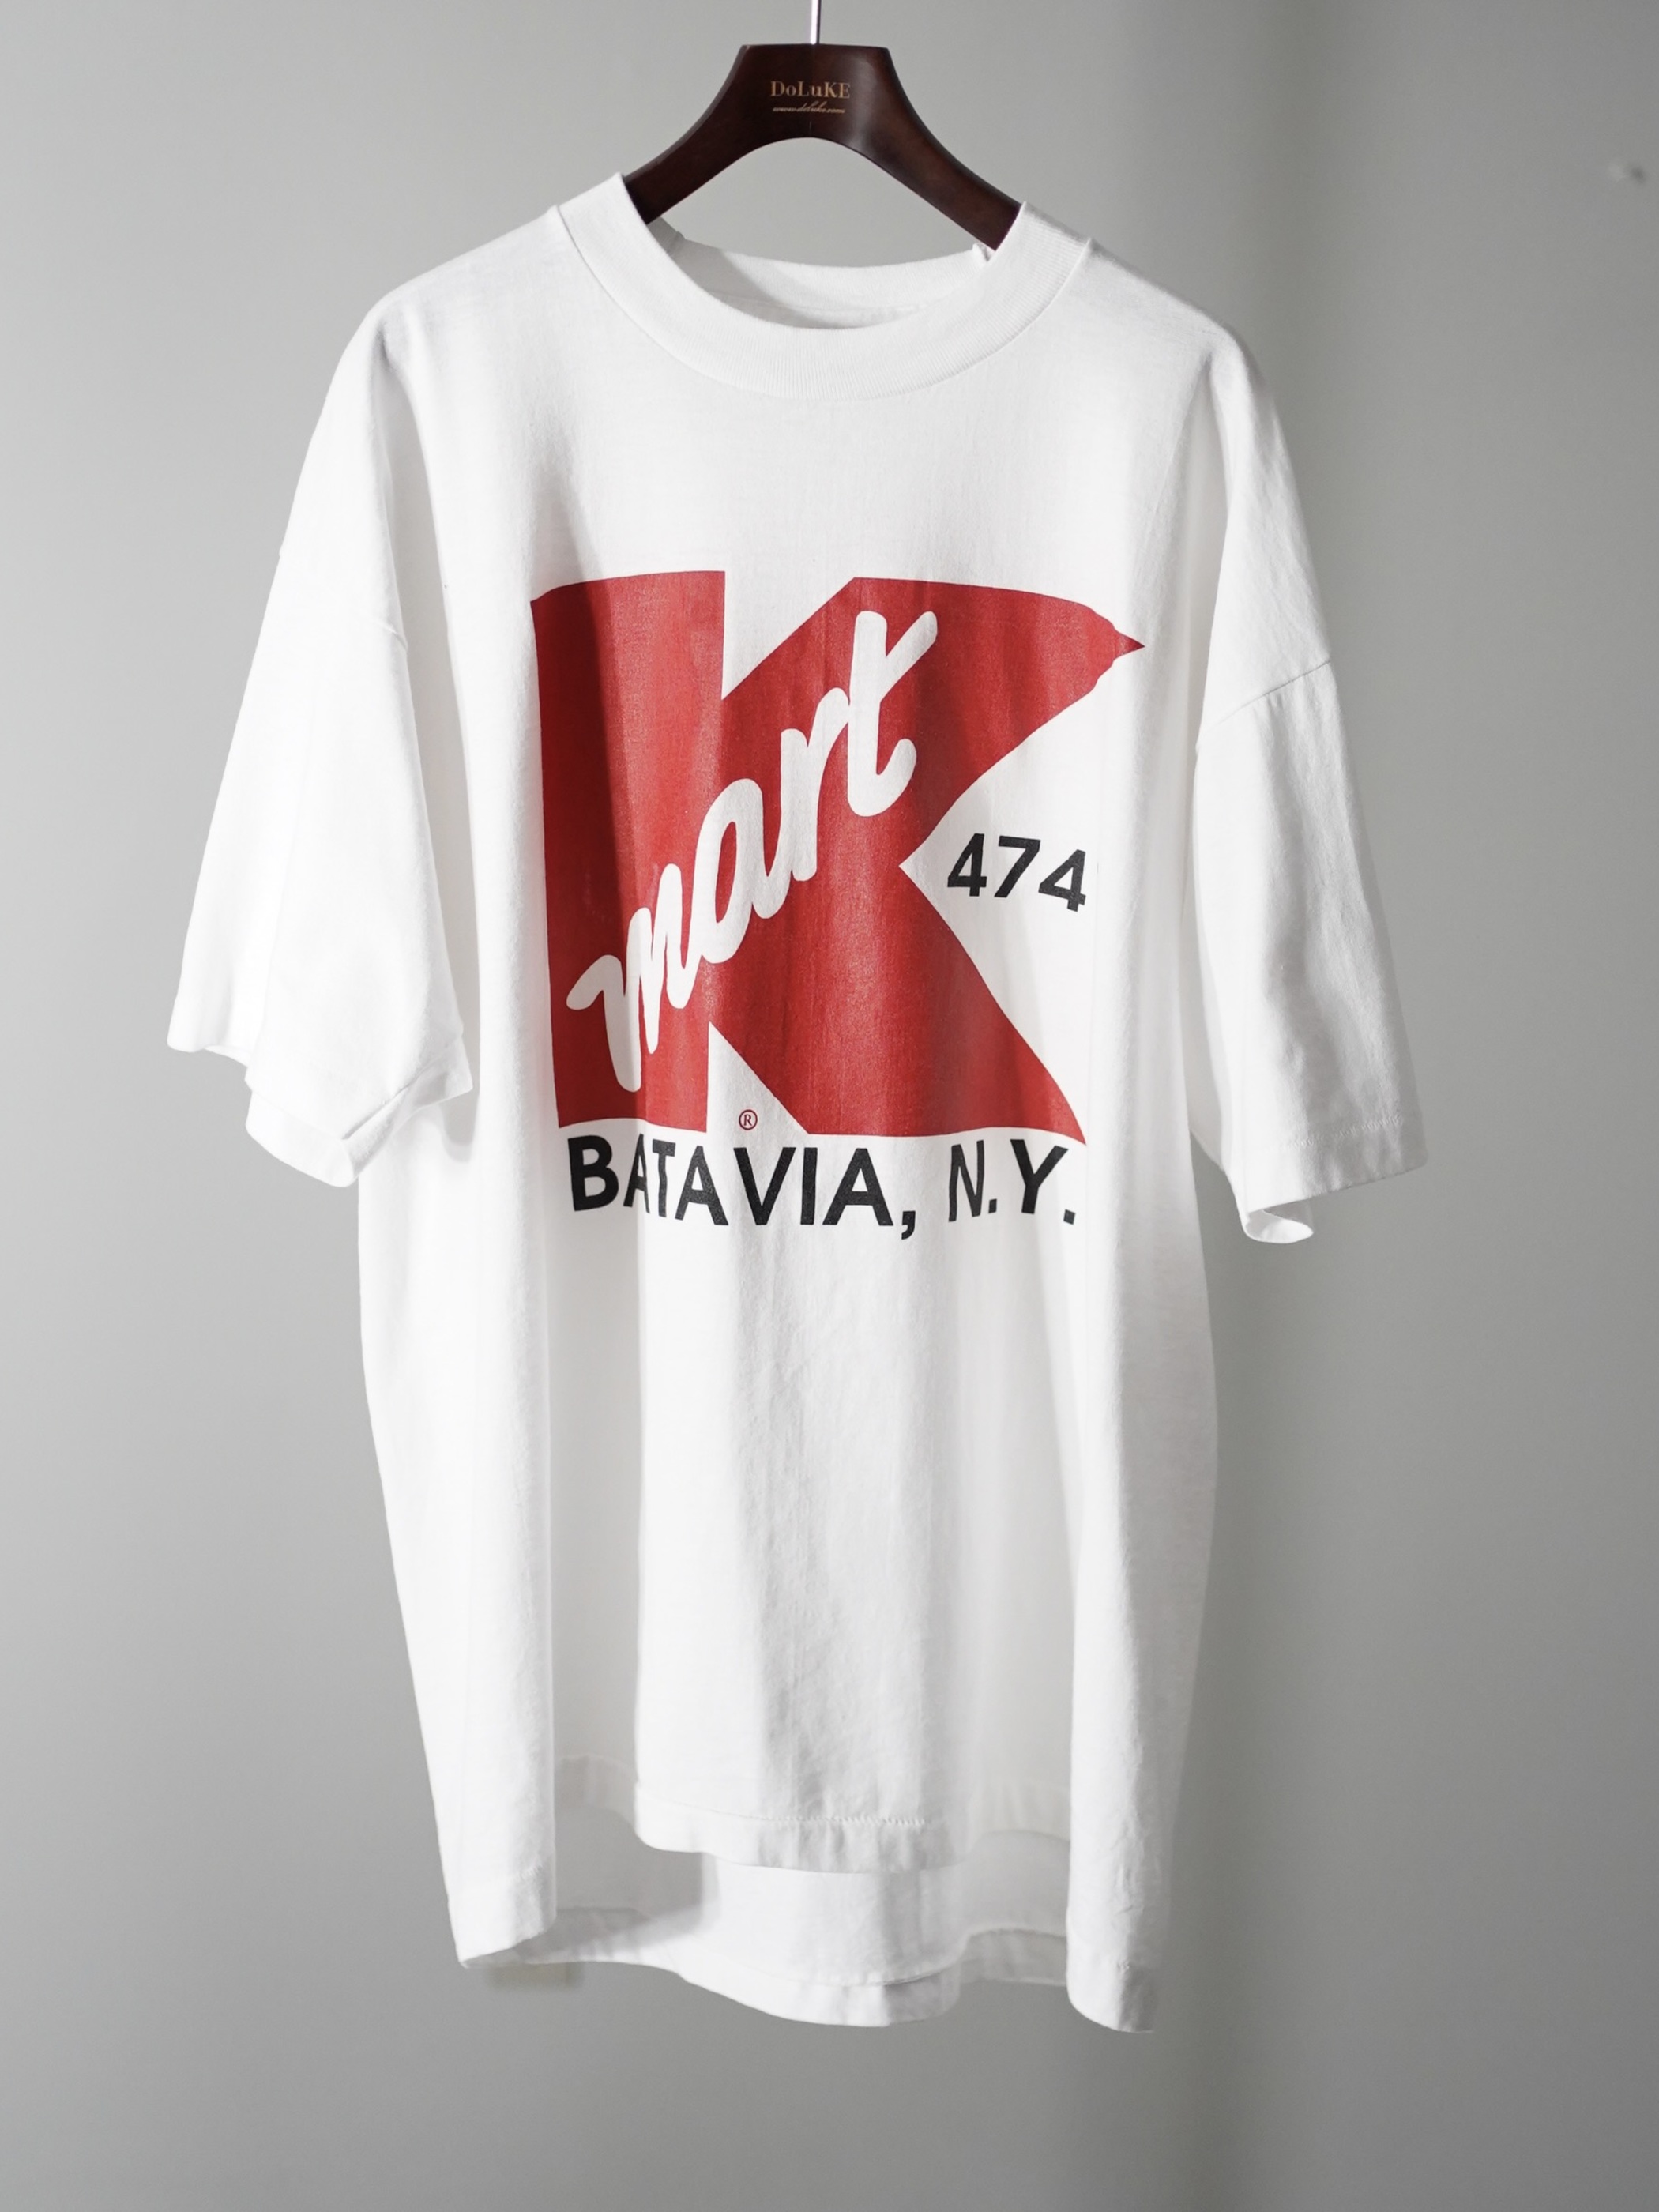 1990's "Kmart" Print T-shirts / Made in USA